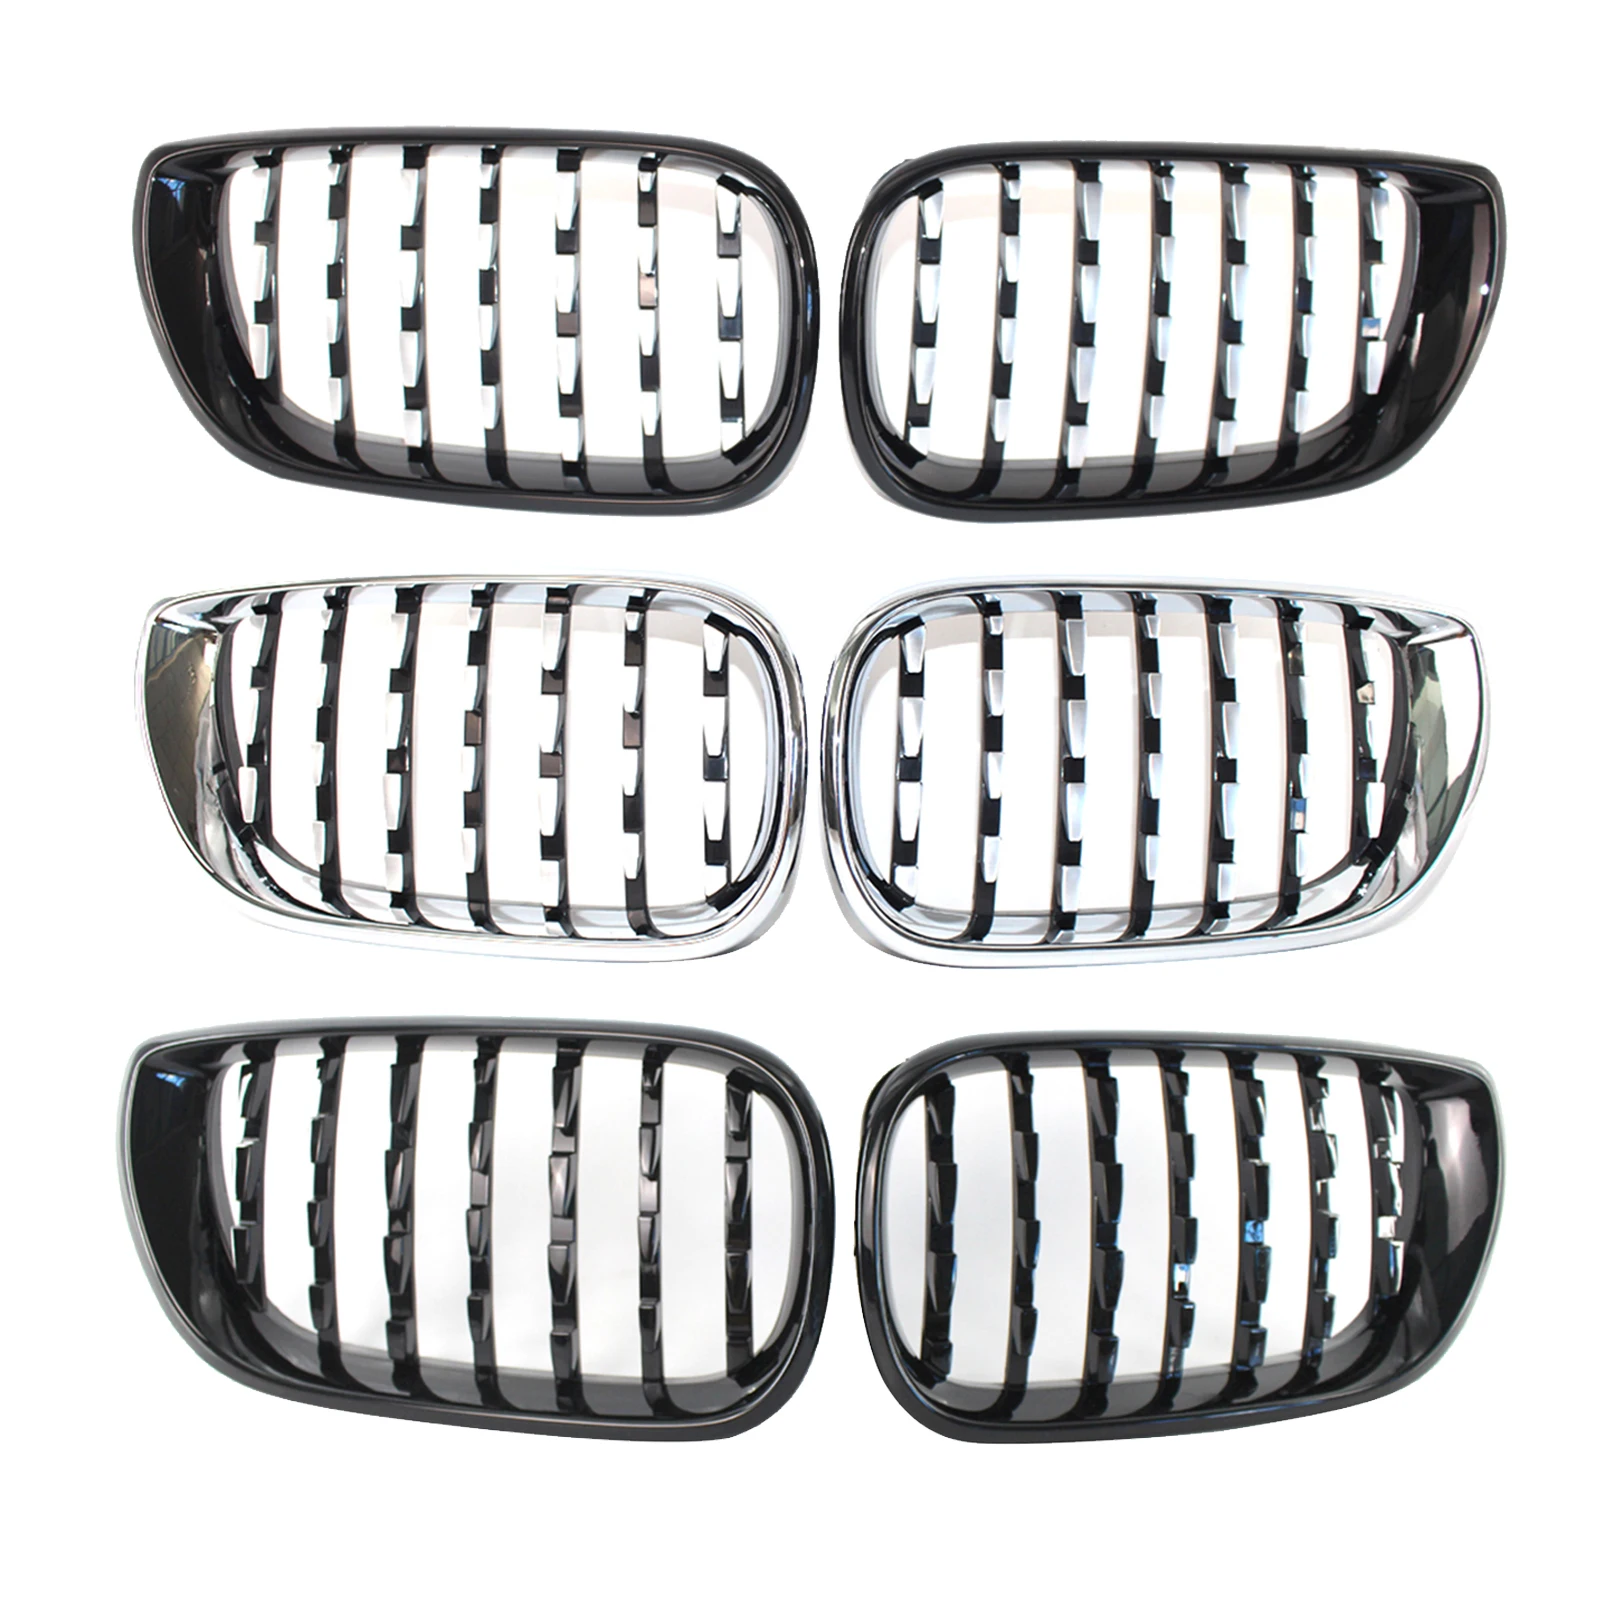 Auto Front Kidney Grille for BMW 3 Series E46 4 Door 2002 2003 2004 2005